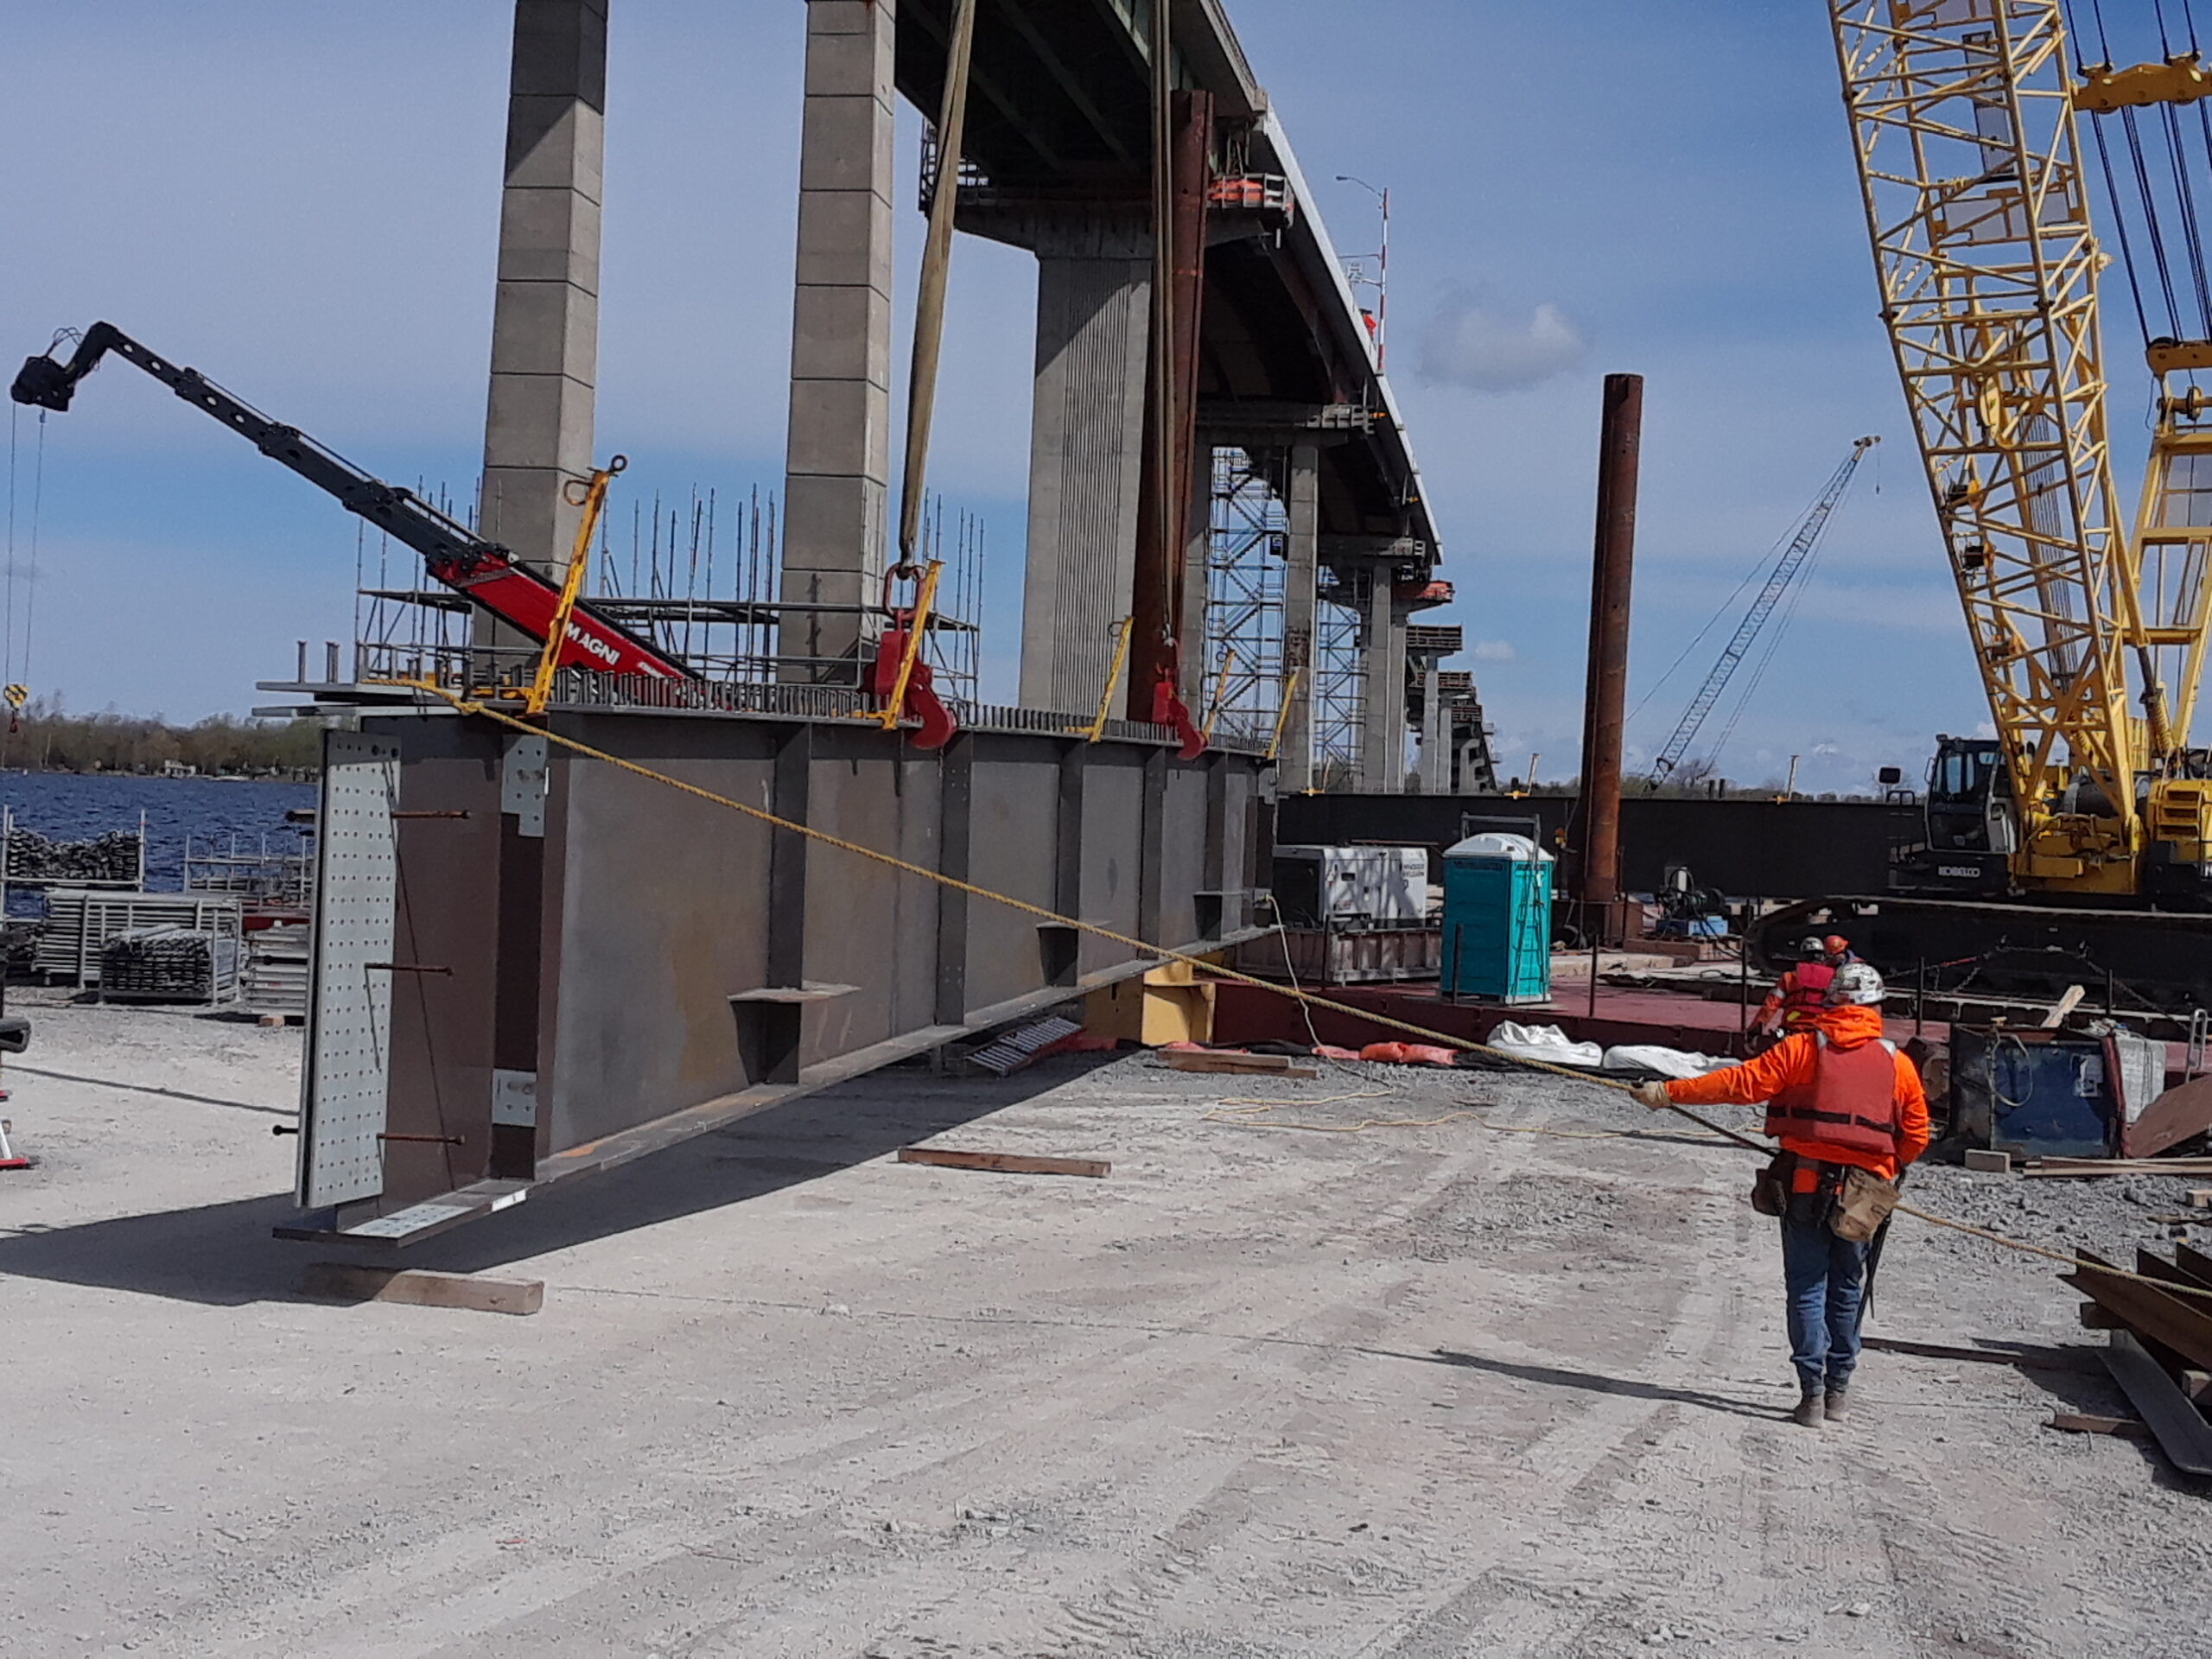 Lifting the second piece of the approach girder for assembly on the barge